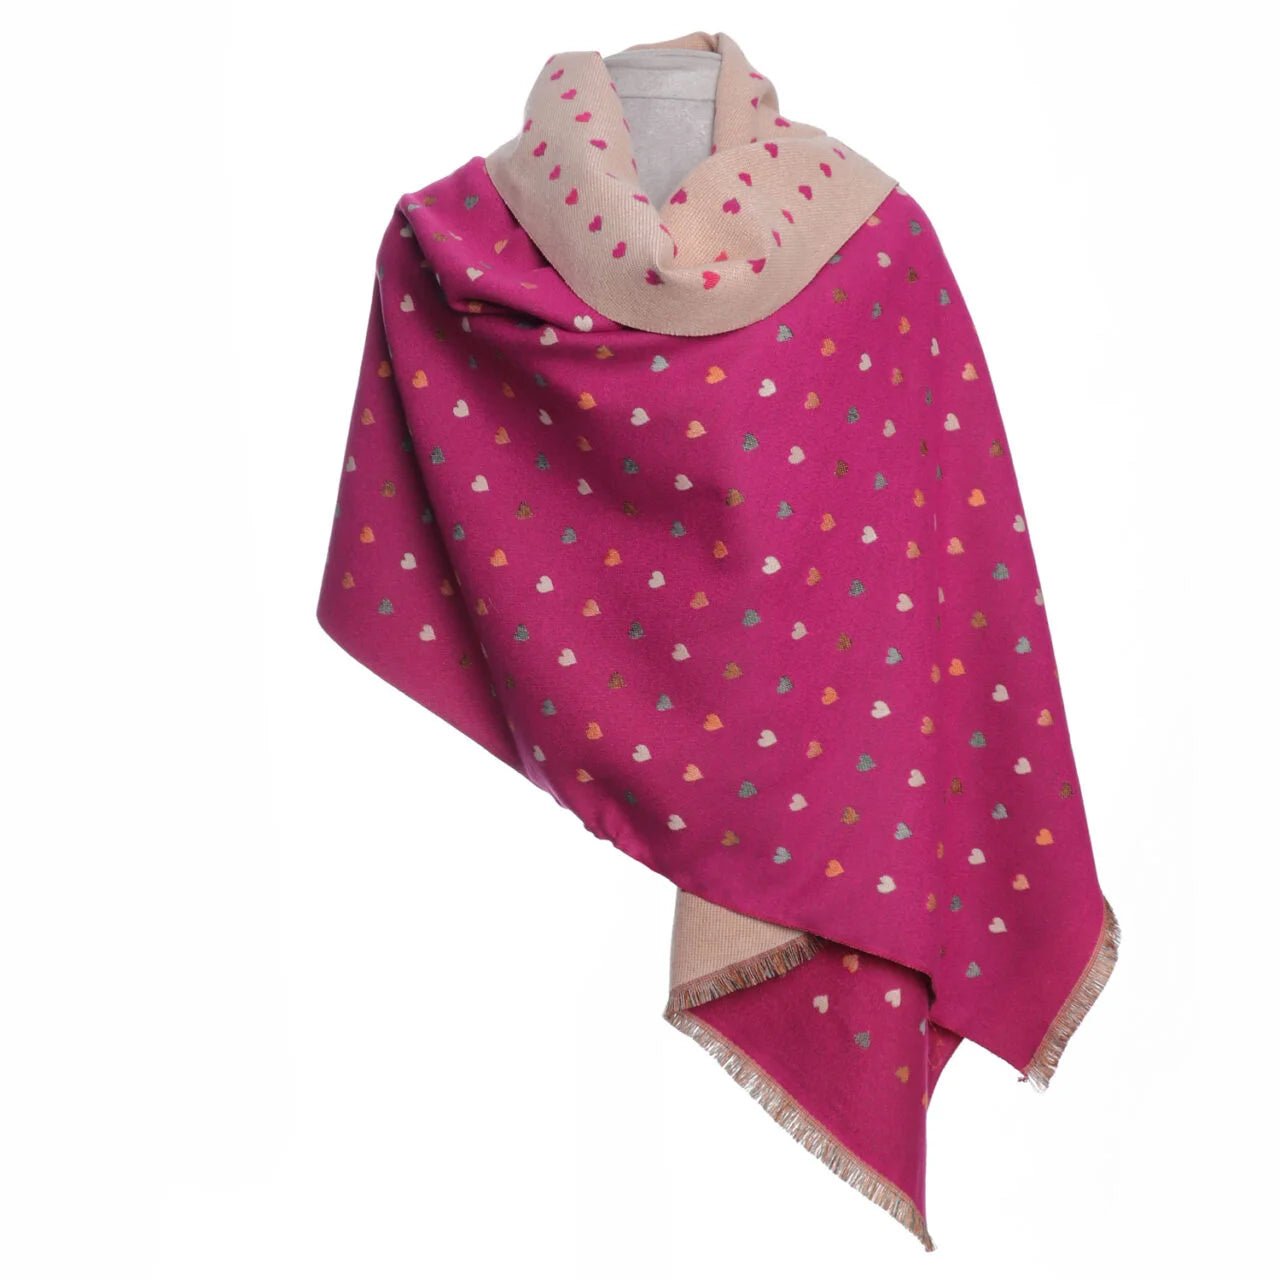 Fab Gifts | Winter Accessories Wrap Mini Hearts Pink by Weirs of Baggot Street